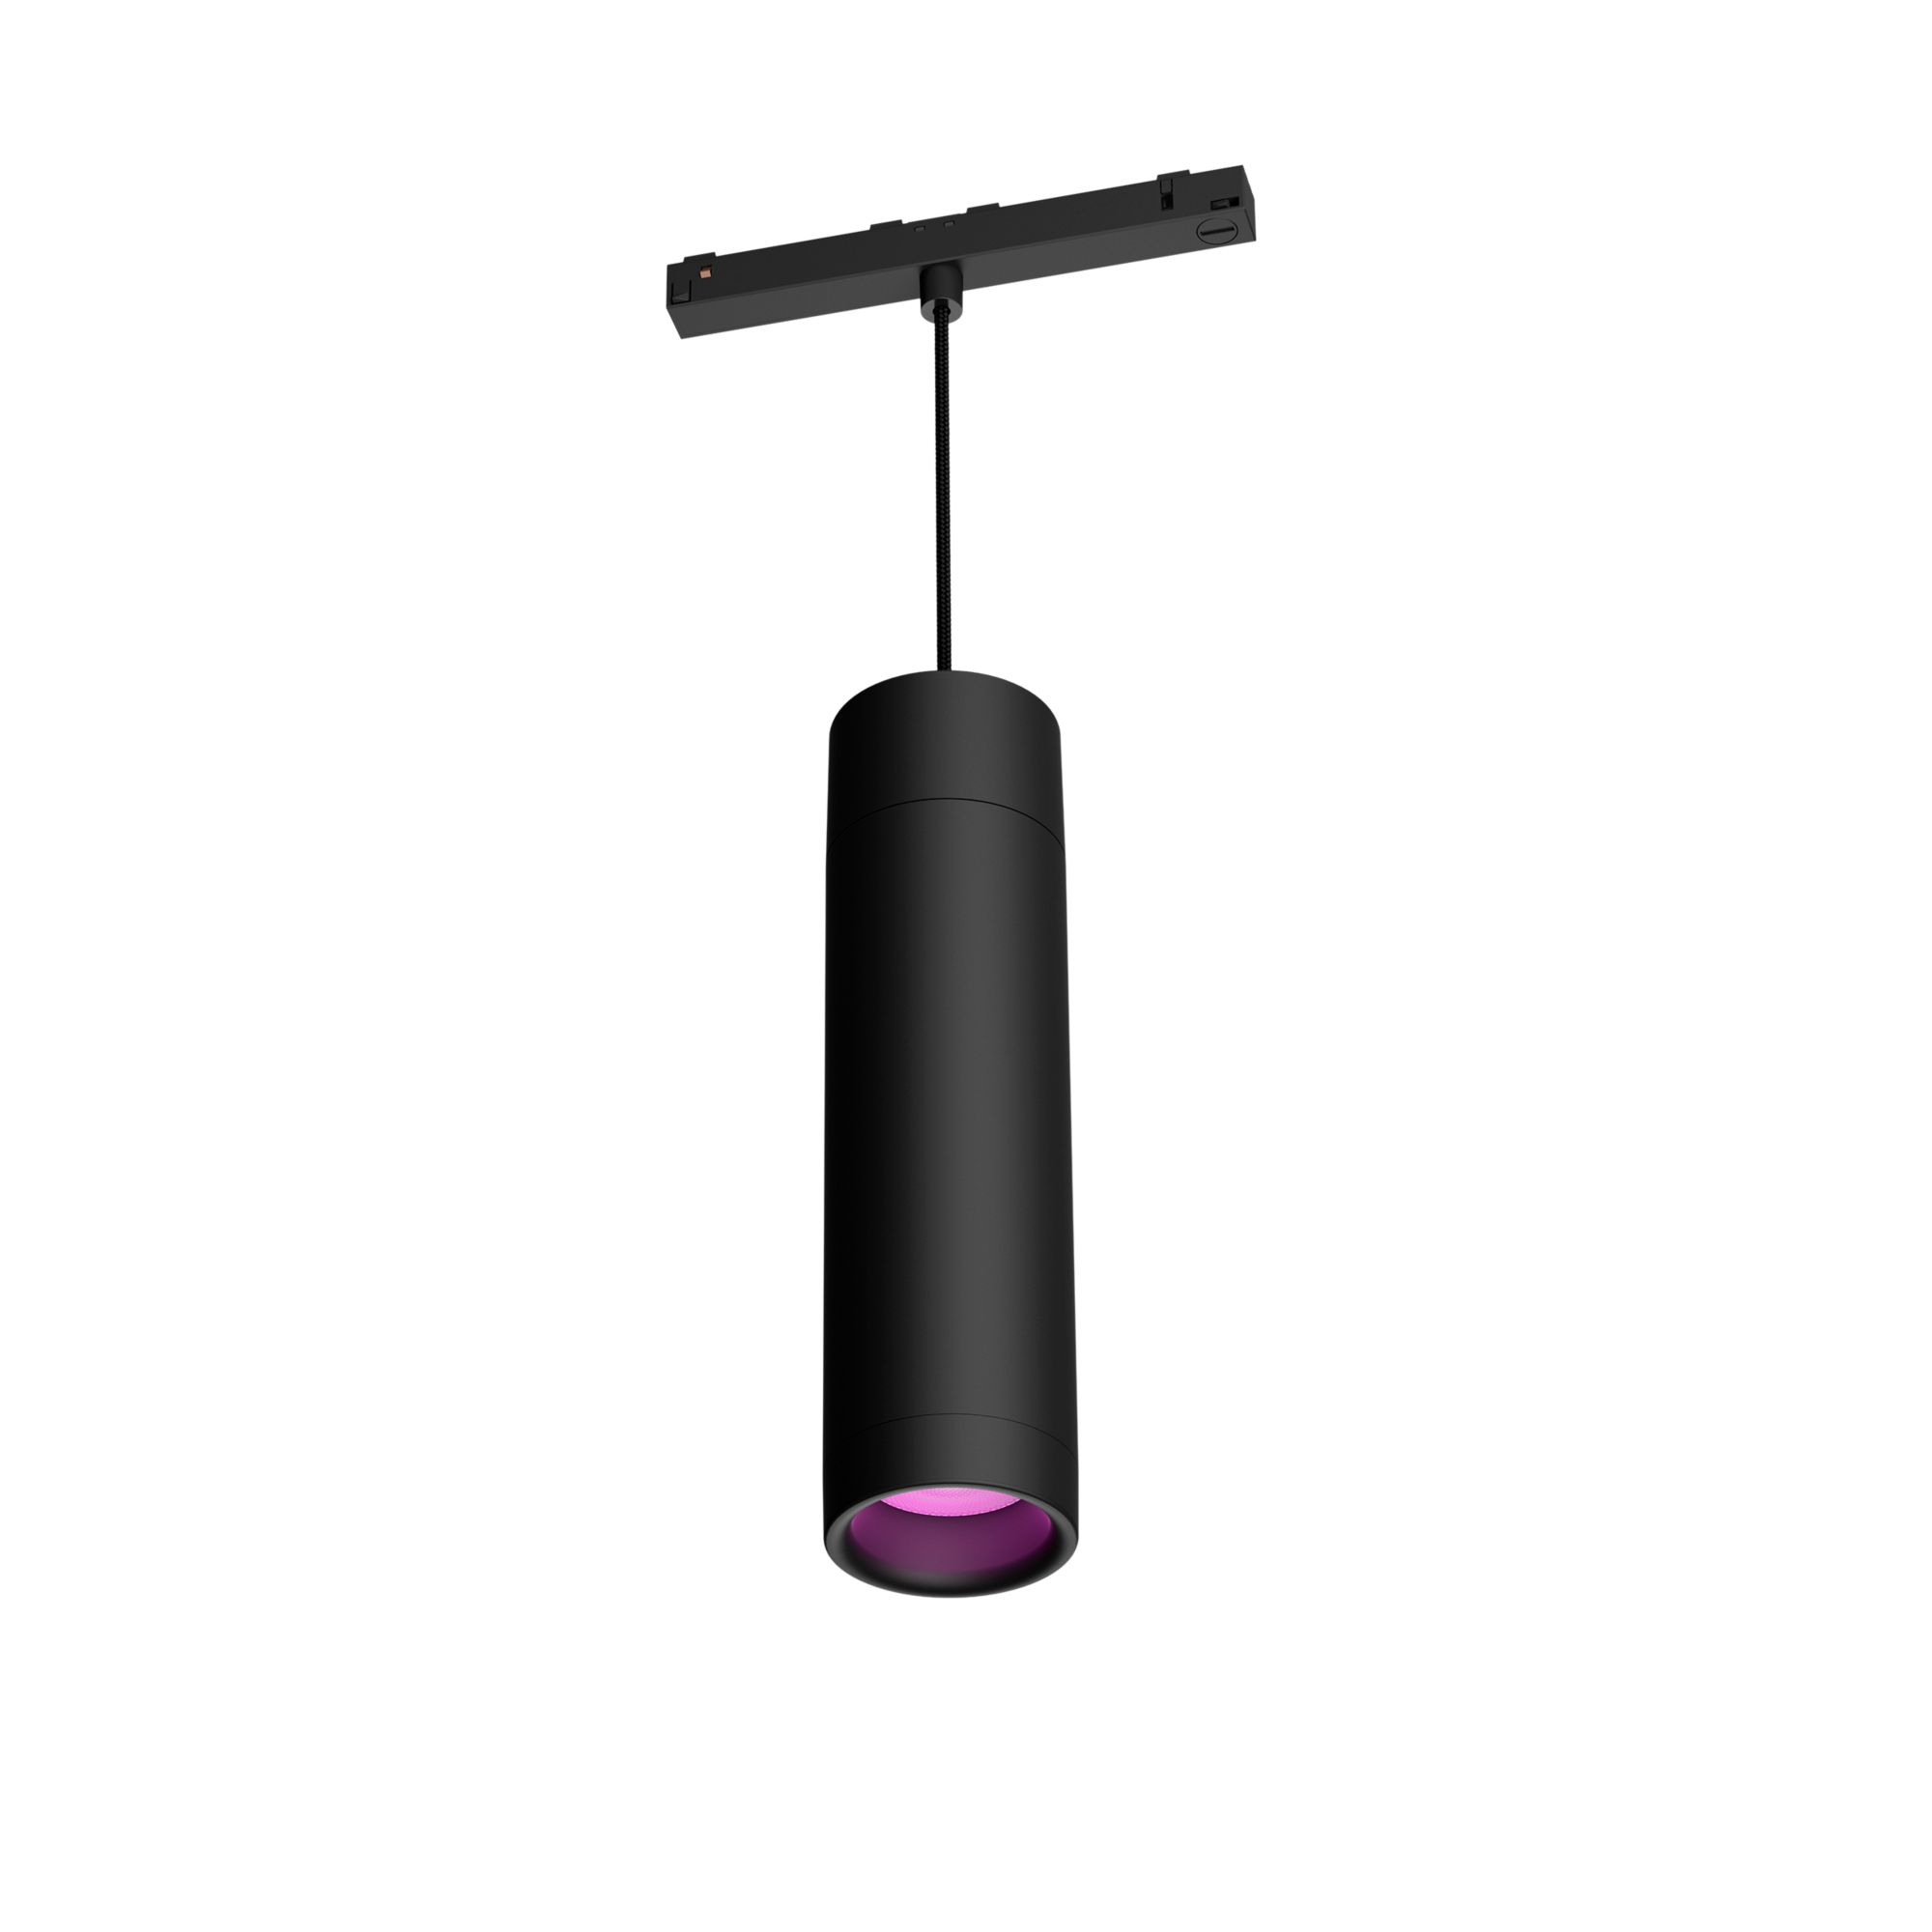 Philips by Signify Perifo cilinder hanglamp